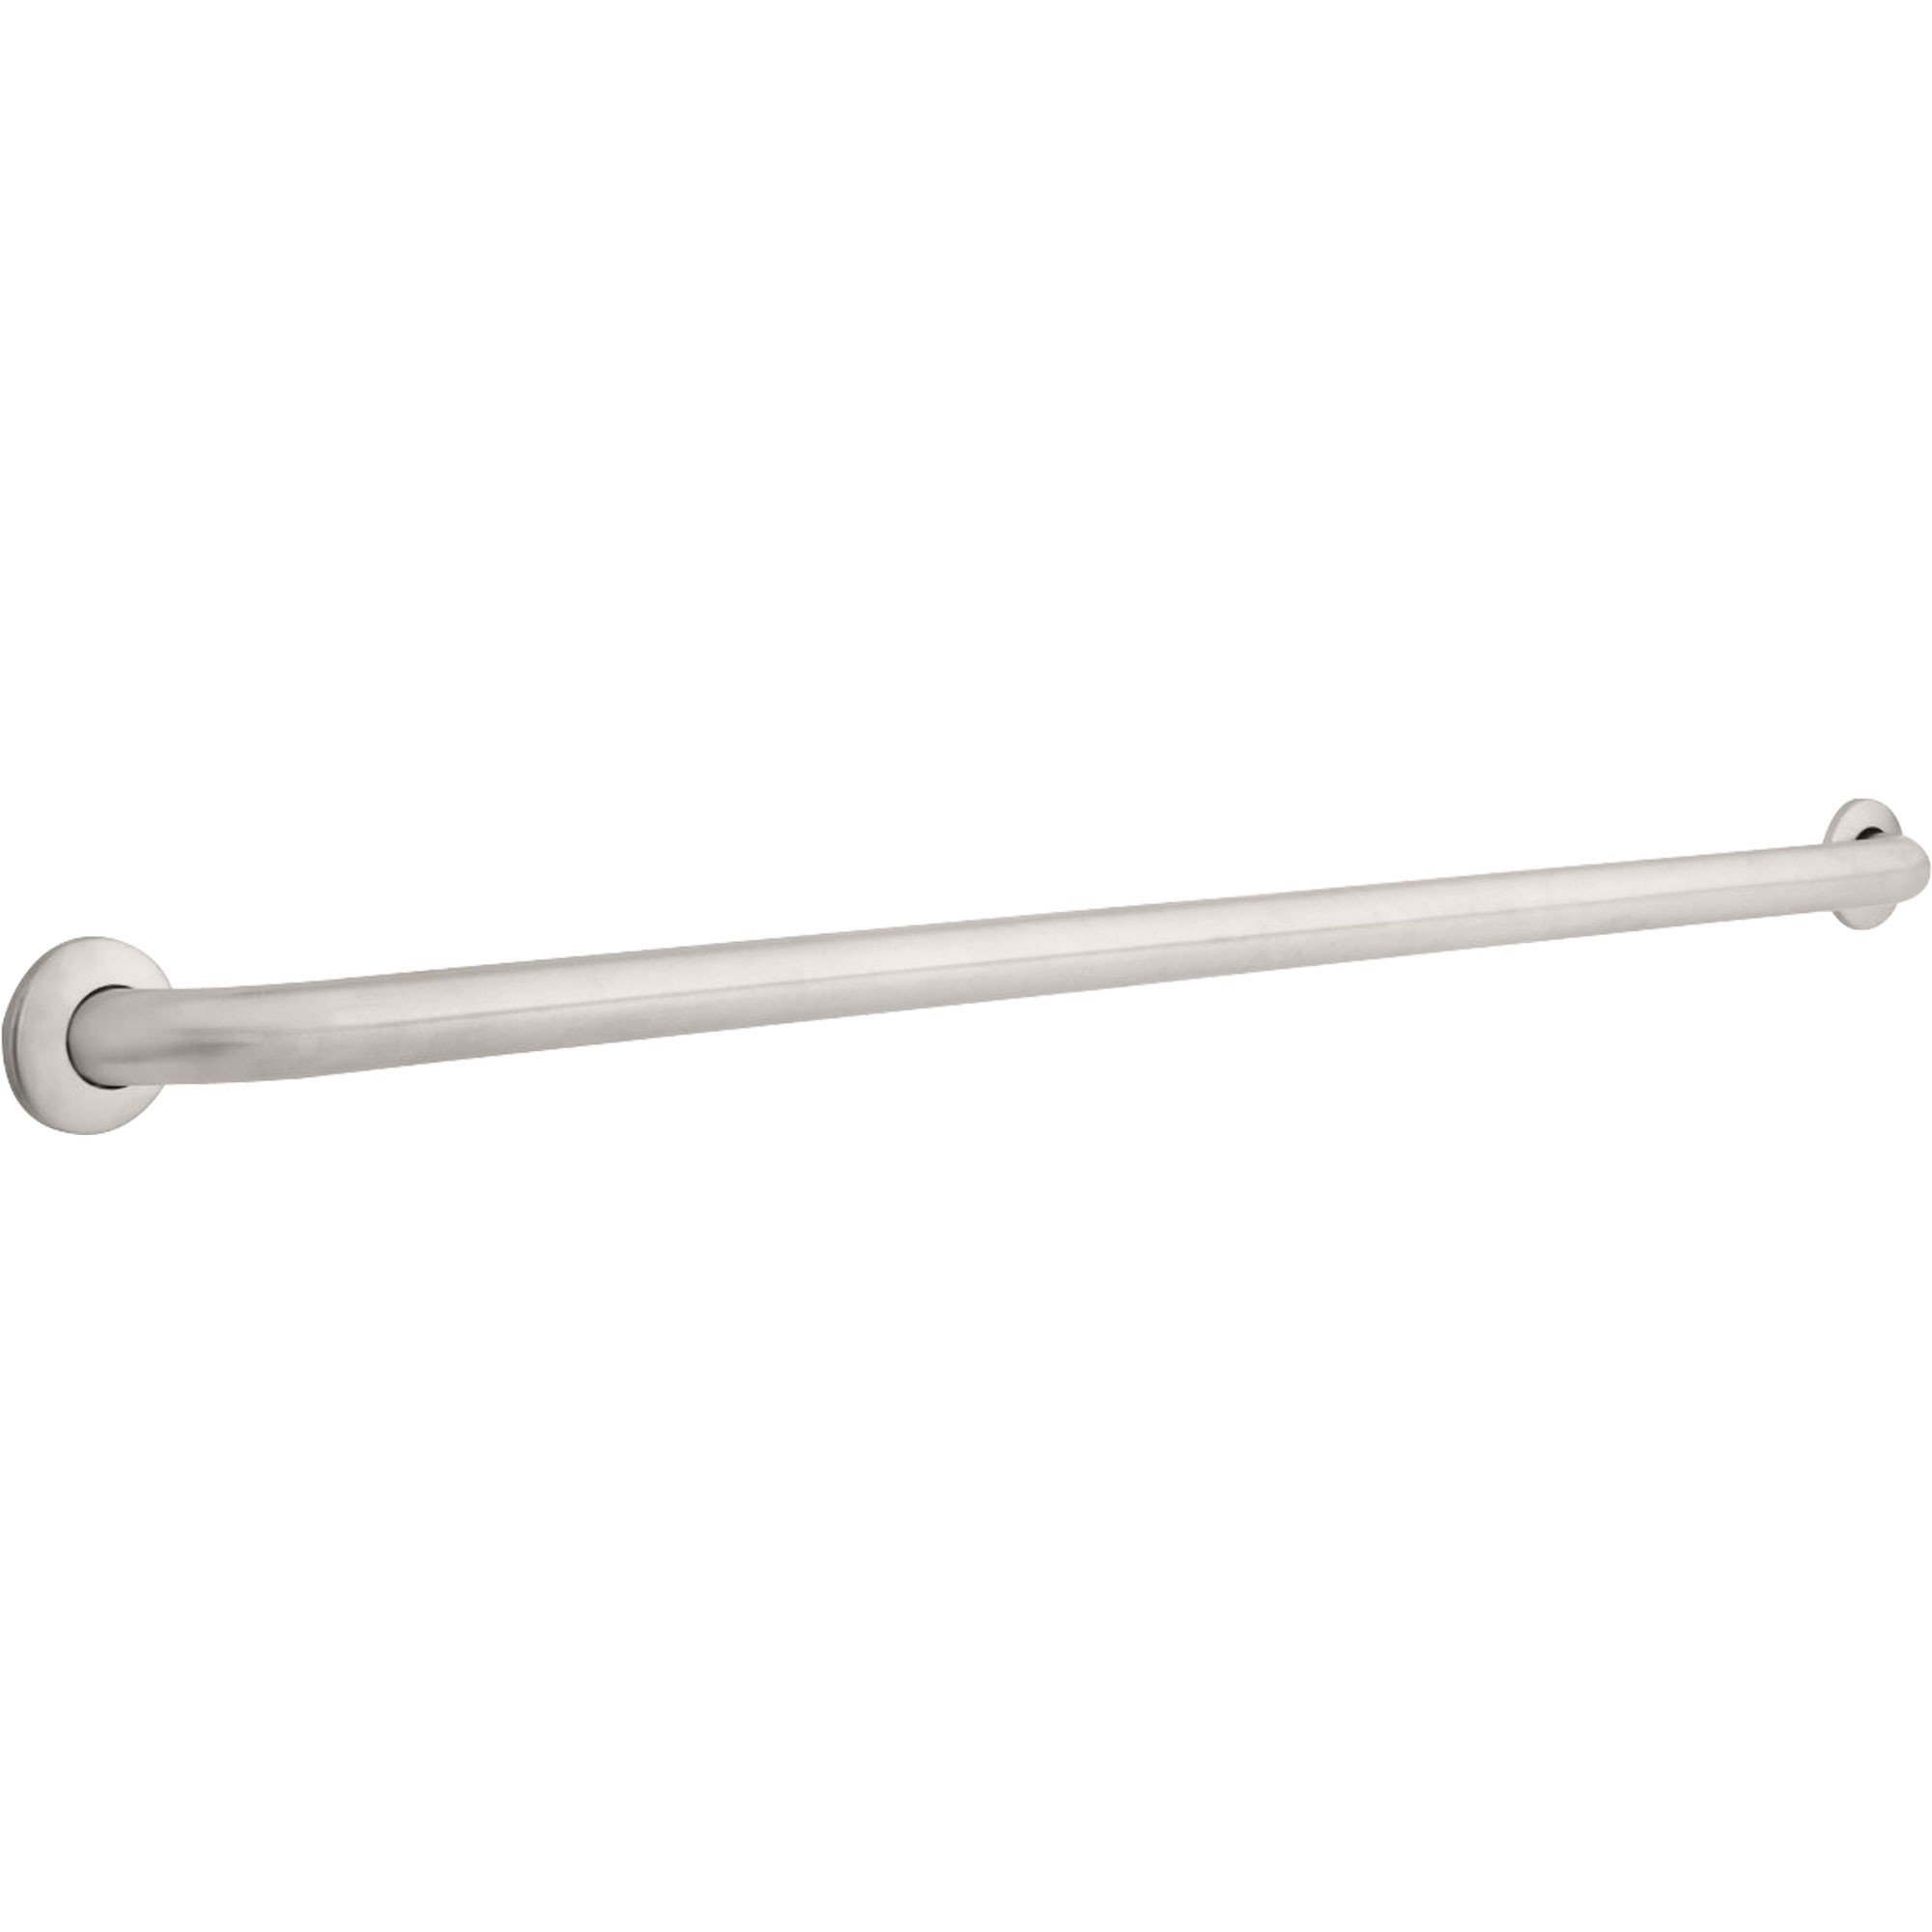 Delta ADA Complaint 1.5" x 48" Concealed Mount Grab Bar in Stainless 567683